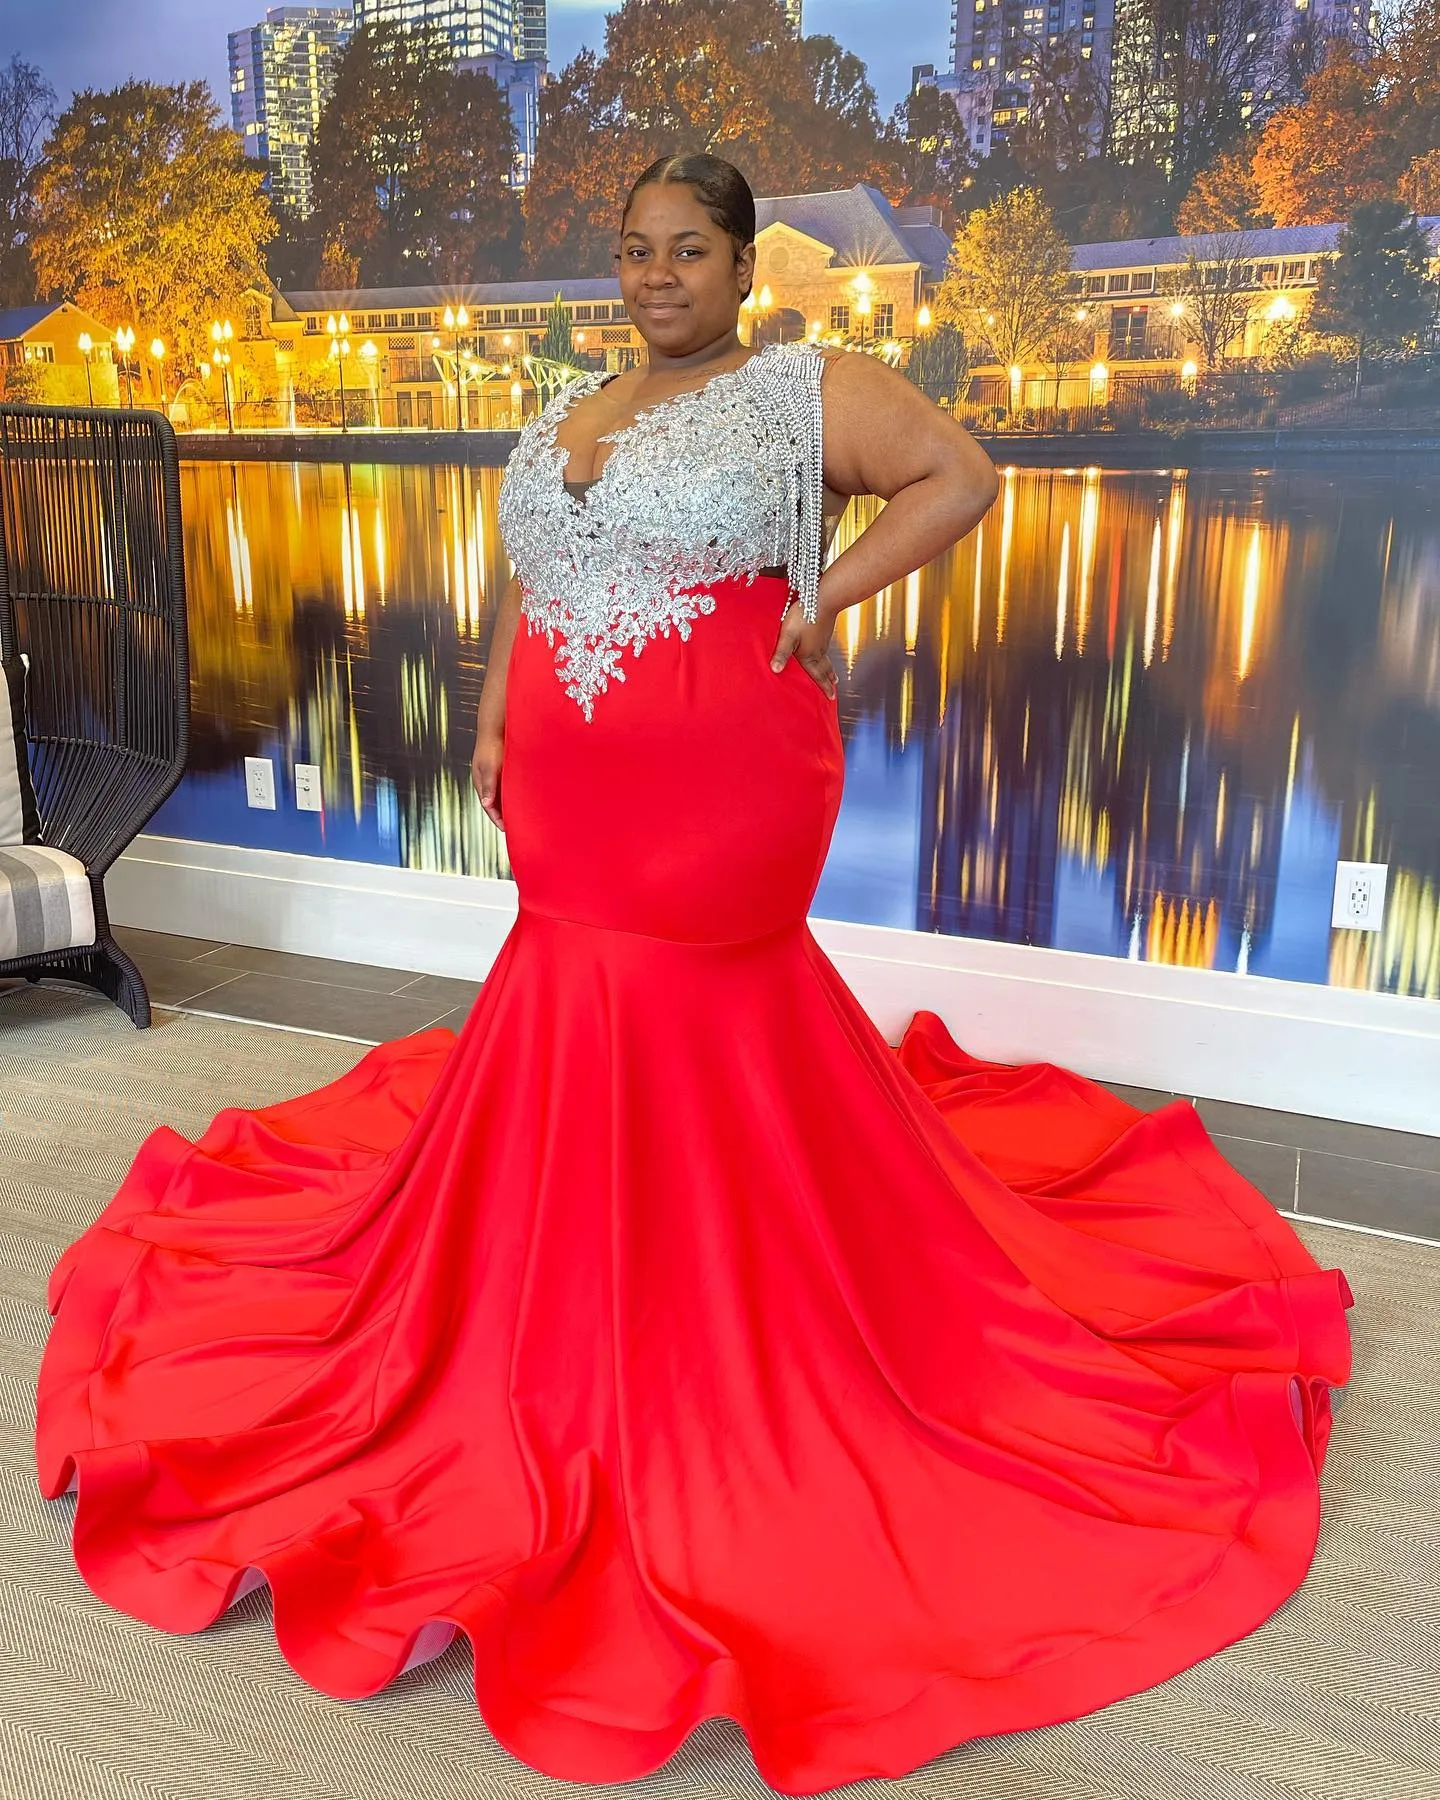 Plus Size Sheer Lace Red Fishtail Prom Dress With Beaded Applique, Satin  Tassels, And V Neckline Perfect For Special Occasions From Weddingteam,  $126.32